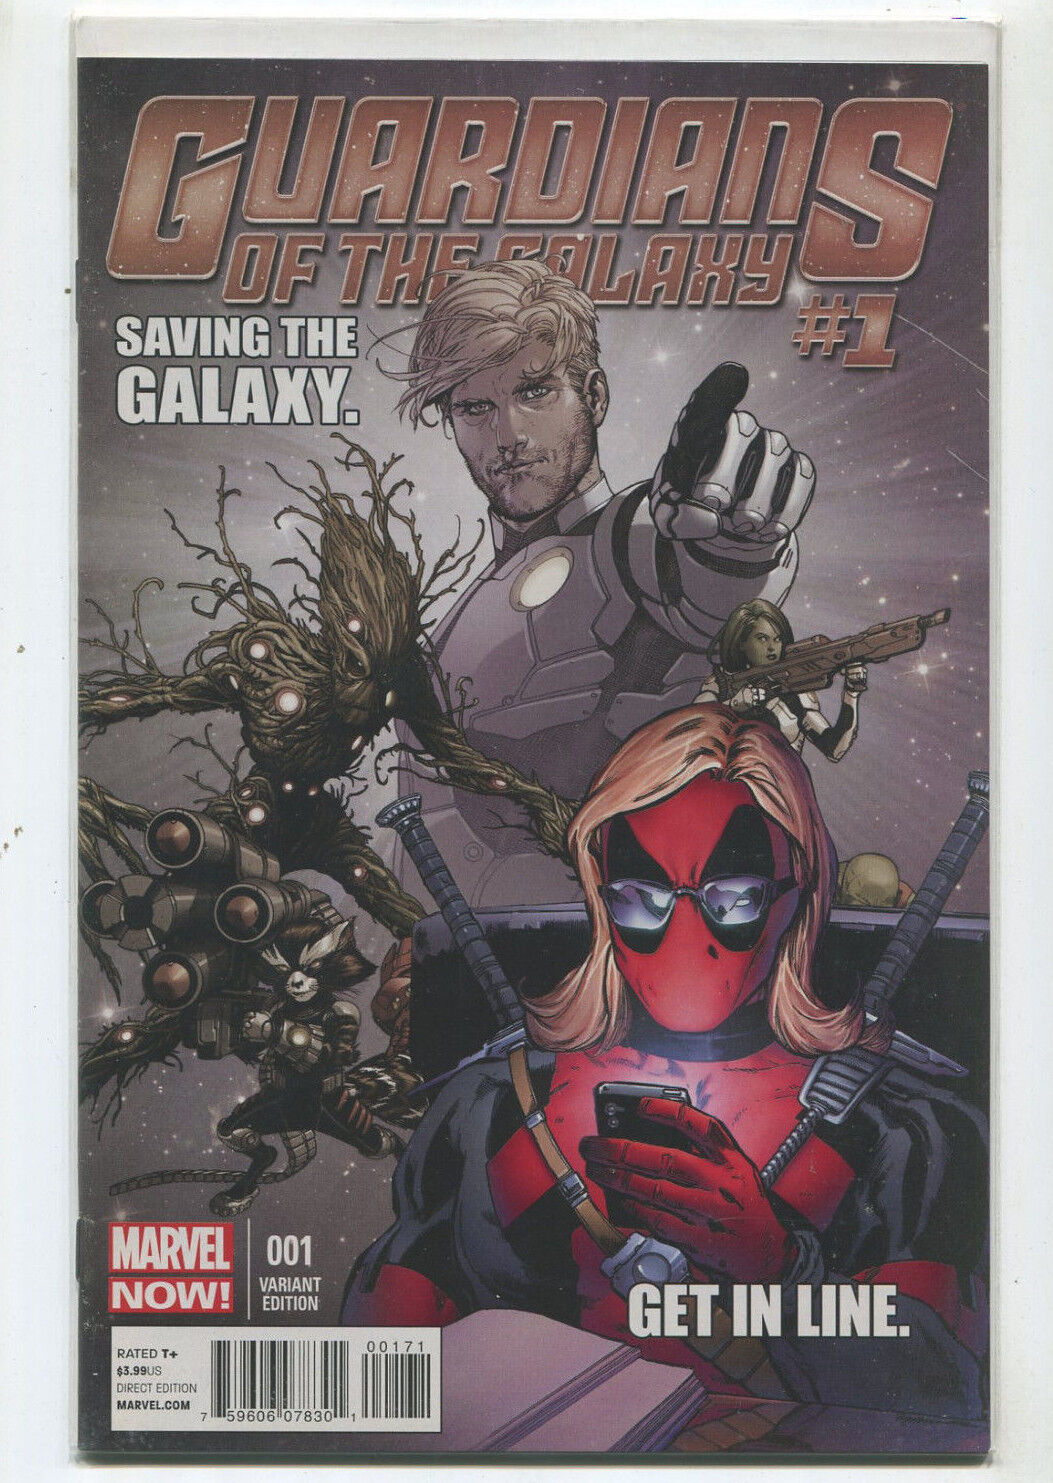 Guardians Of The Galaxy #1 NM VARIANT EDITION  Saving The Galaxy  Marvel CBX11A